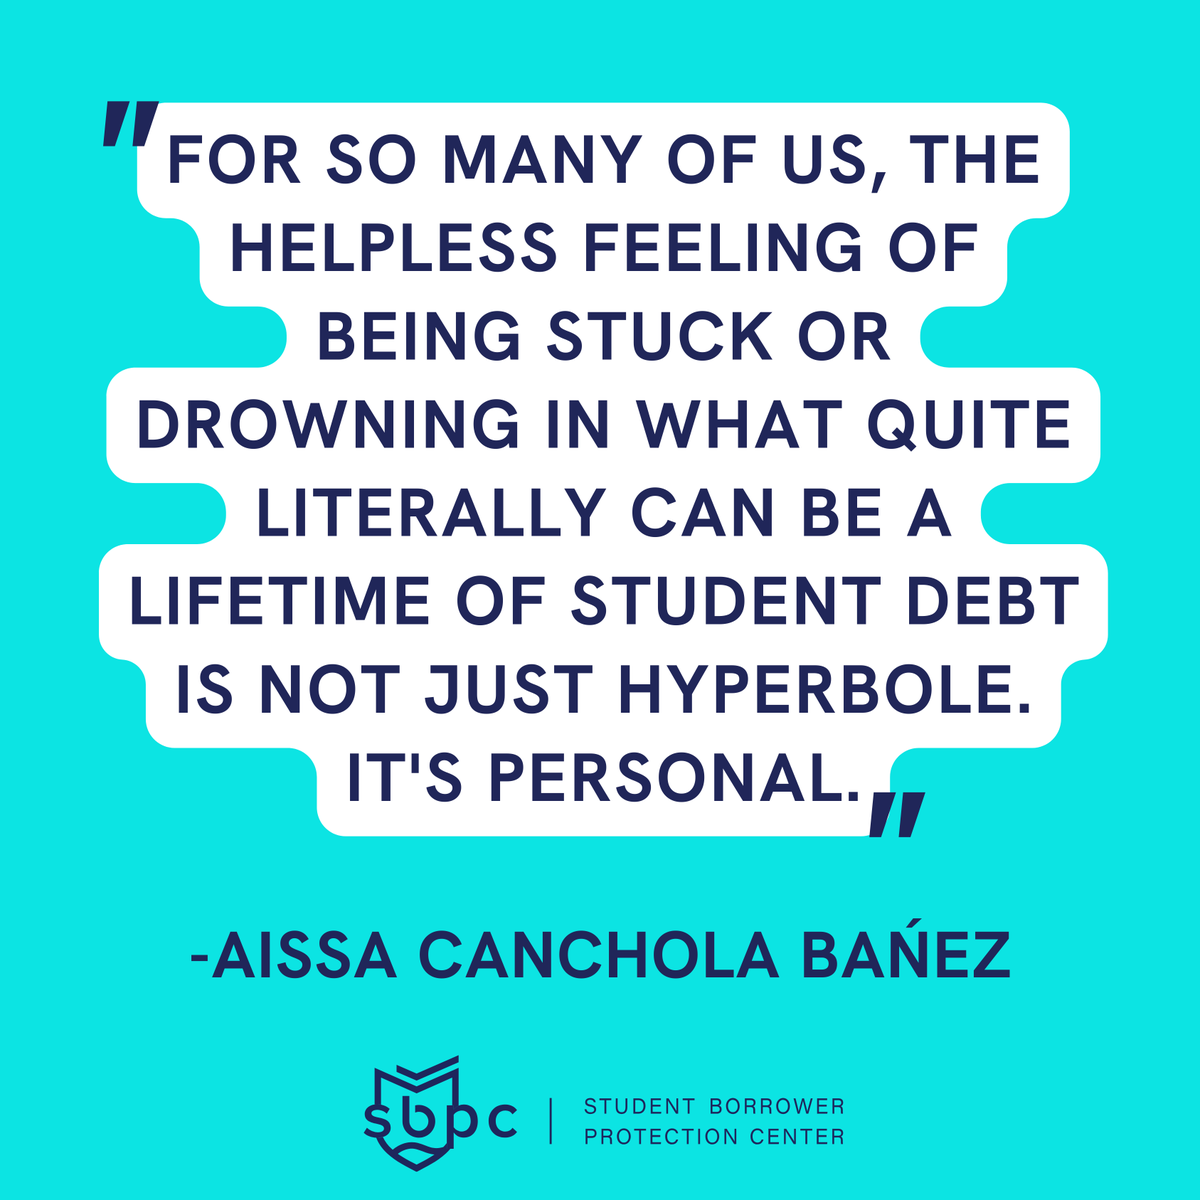 Student loans should never be a lifetime hardship. But they 𝙛𝙧𝙚𝙦𝙪𝙚𝙣𝙩𝙡𝙮 are.